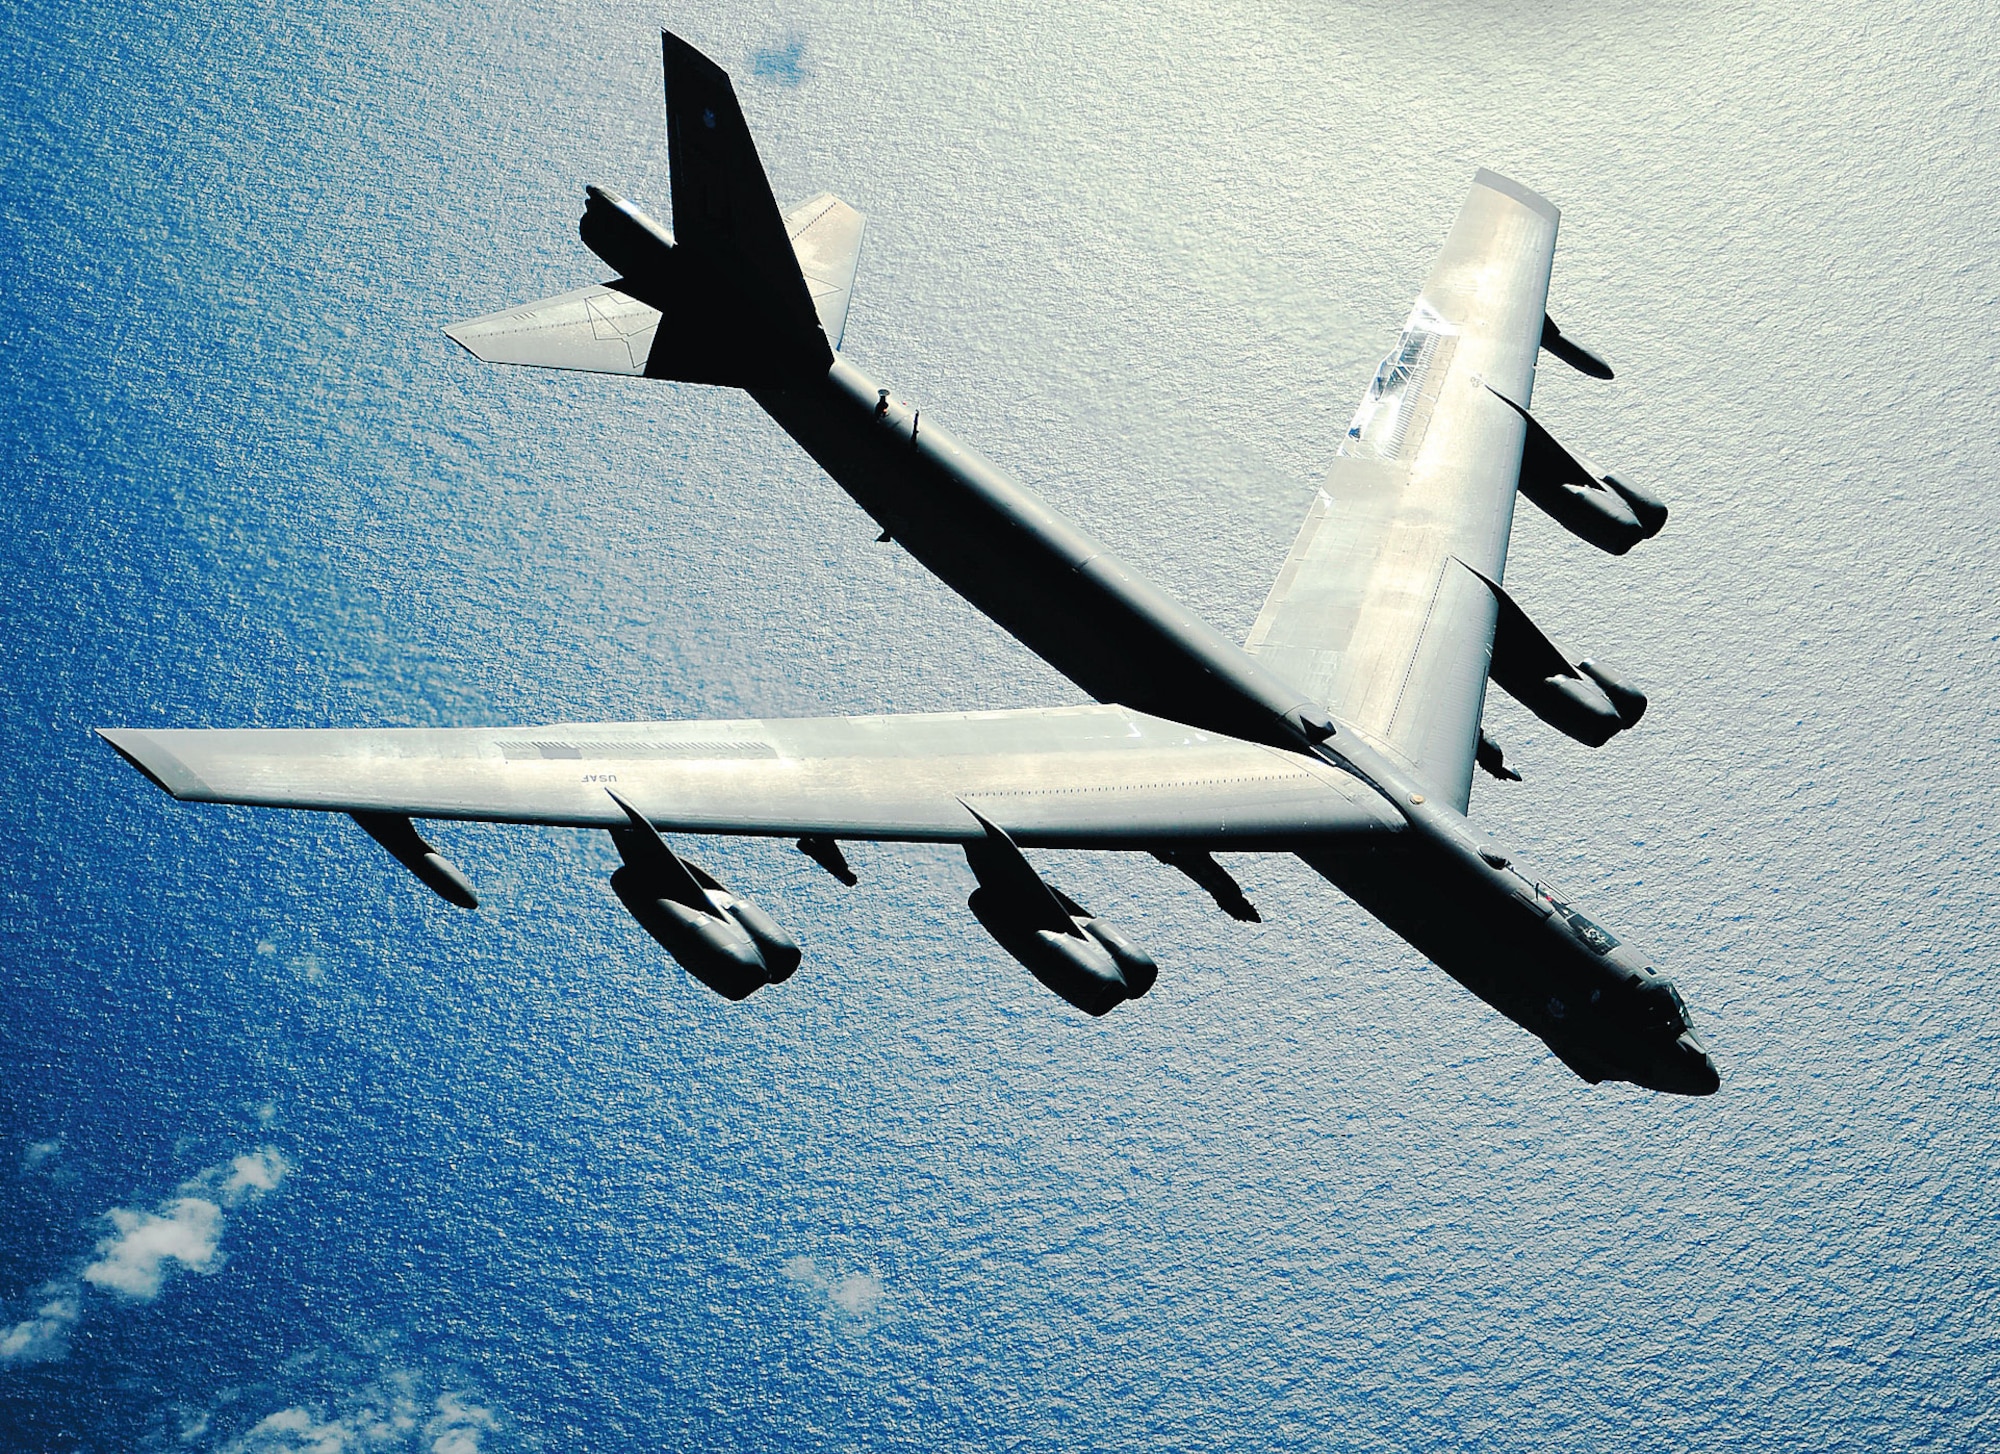 air-force-s-youngest-b-52-turns-50-this-year-joint-base-elmendorf